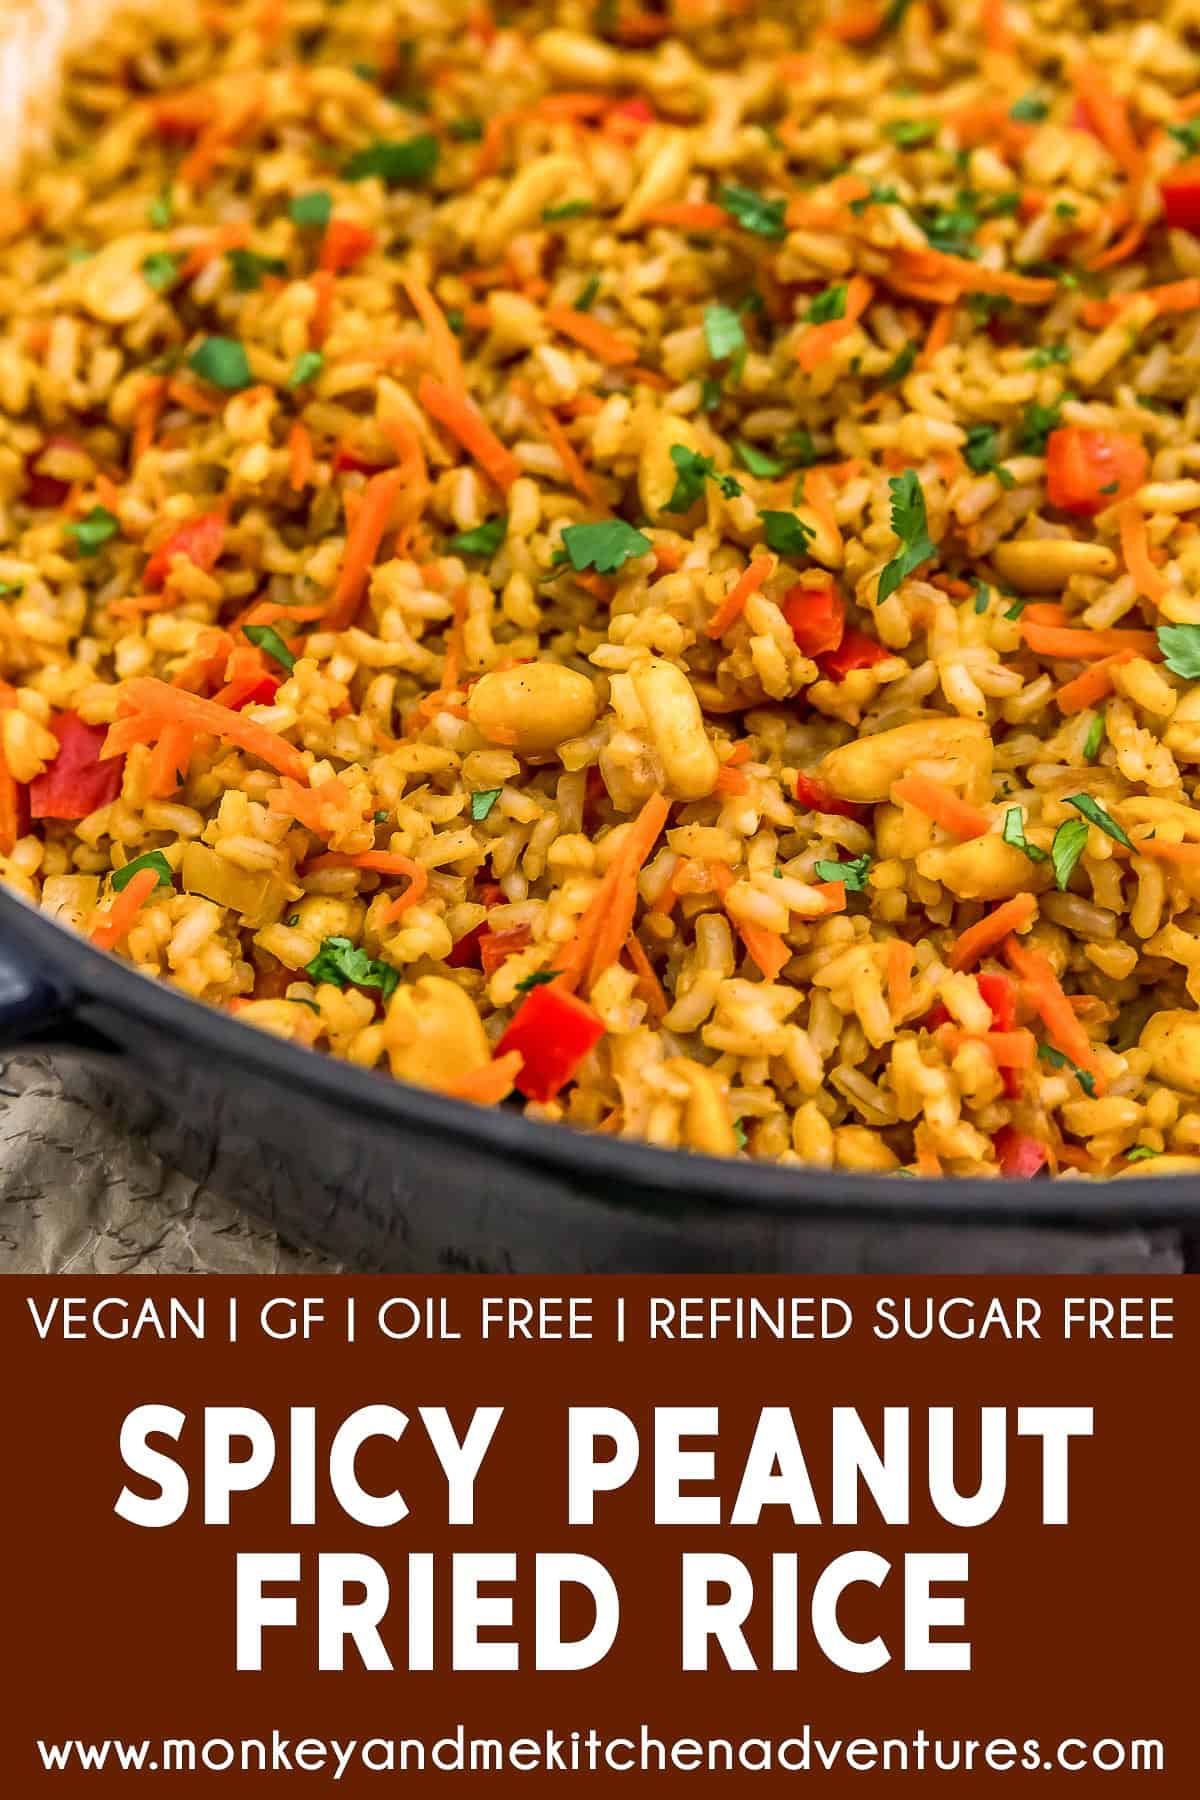 Spicy Peanut Fried Rice with Text Description